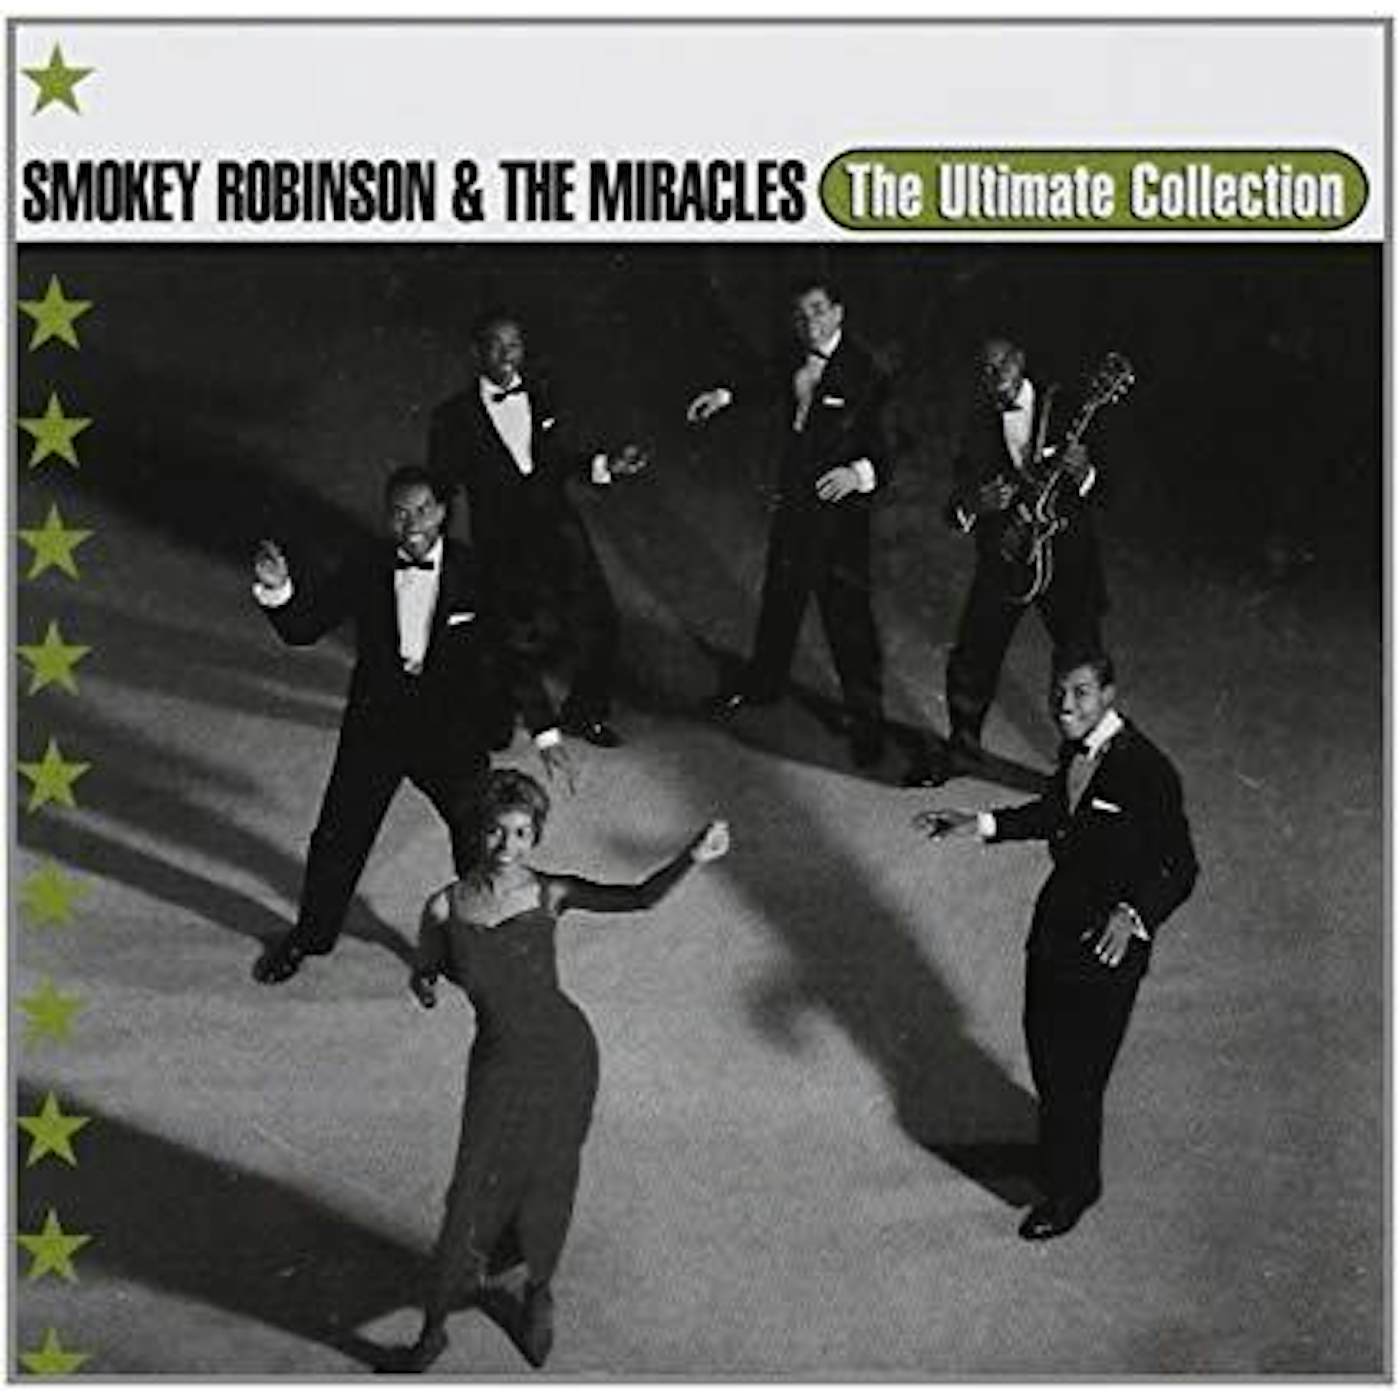 Smokey Robinson & The Miracles ULTIMATE COLLECTION CD